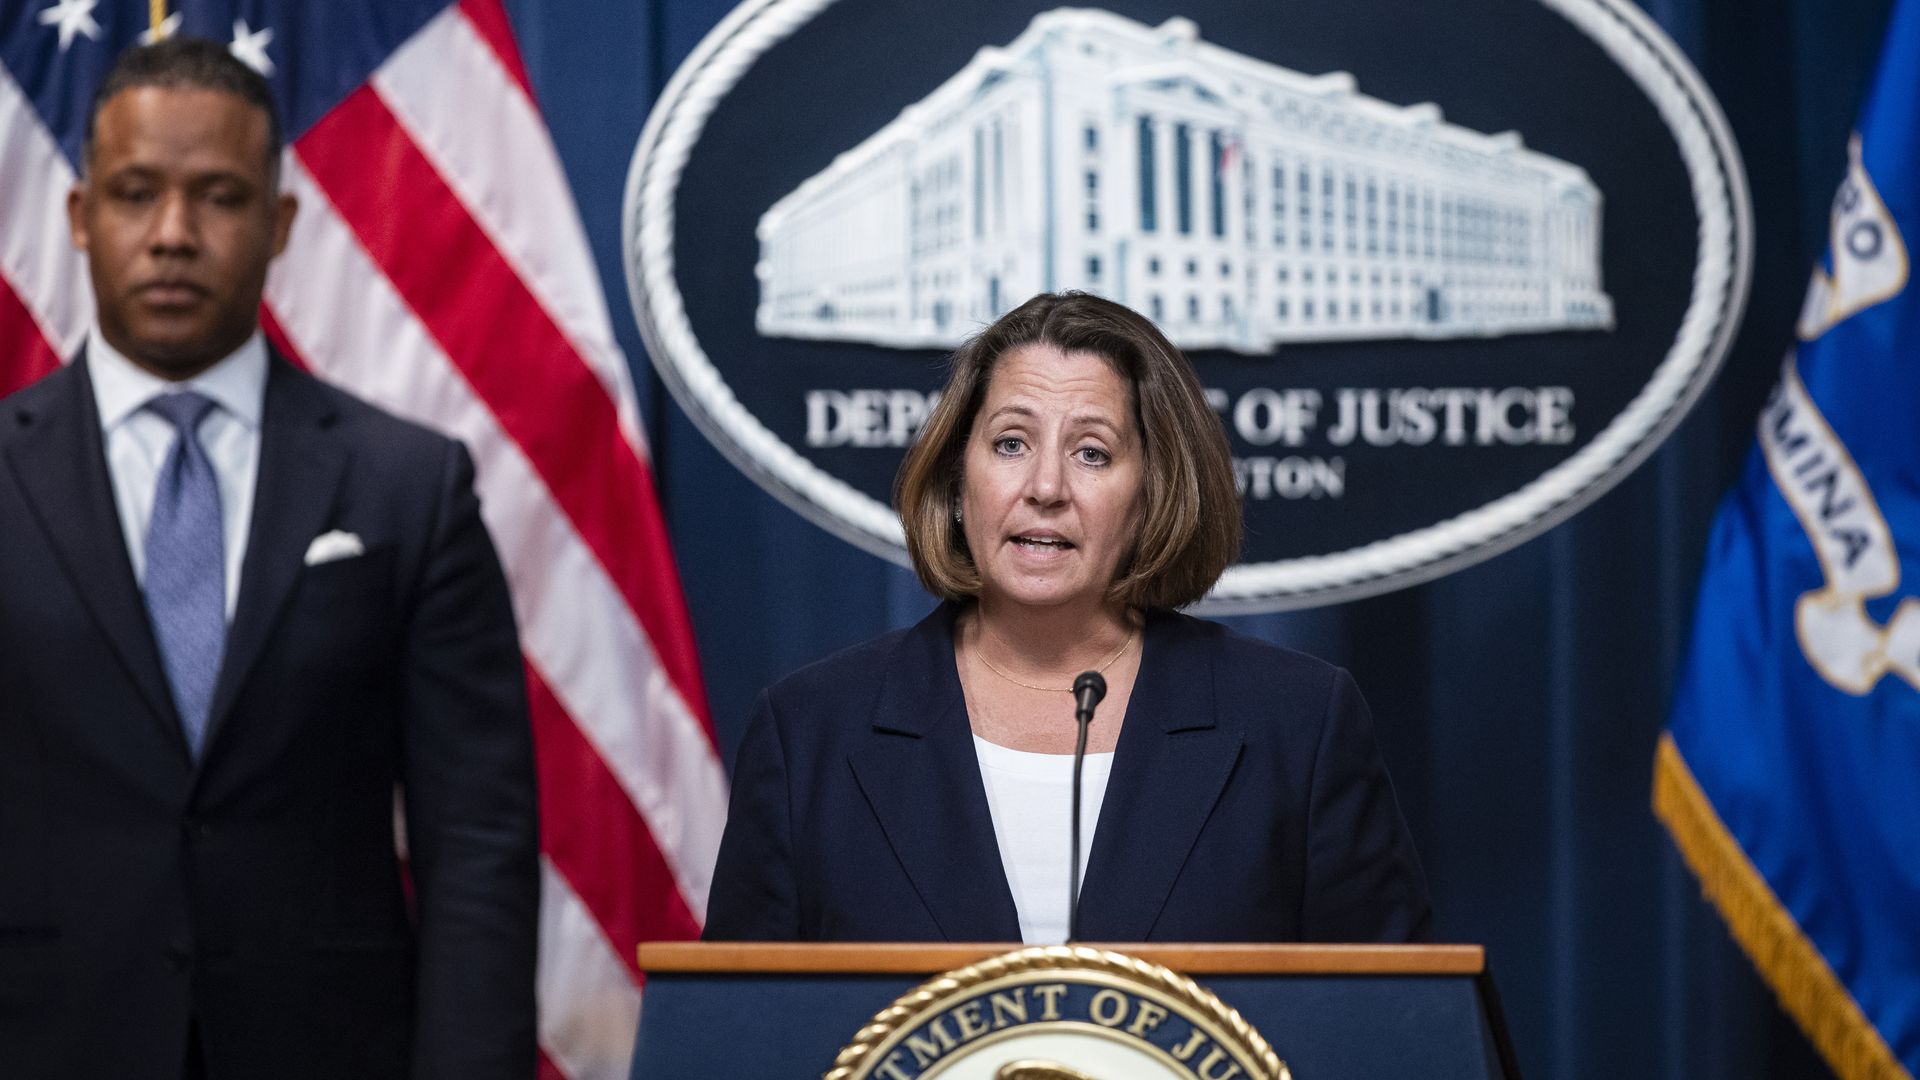 Lisa Monaco speaks at a press conference